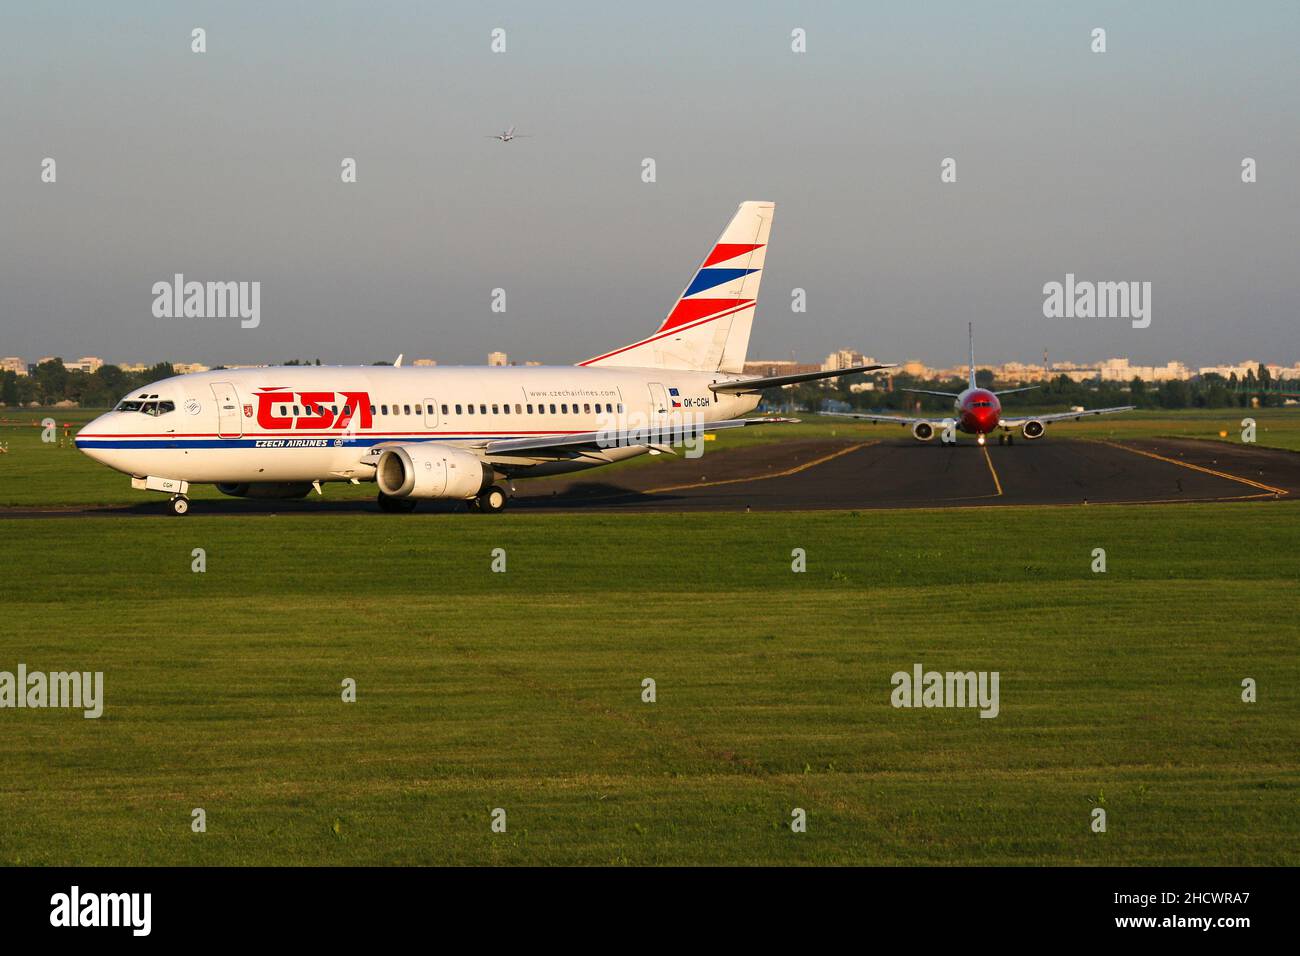 Warsaw, Poland - 07 august 2008: Side view of czech airlines CSA jet airplane Boeing 737-55S taxiing on taxiway to the runway Stock Photo